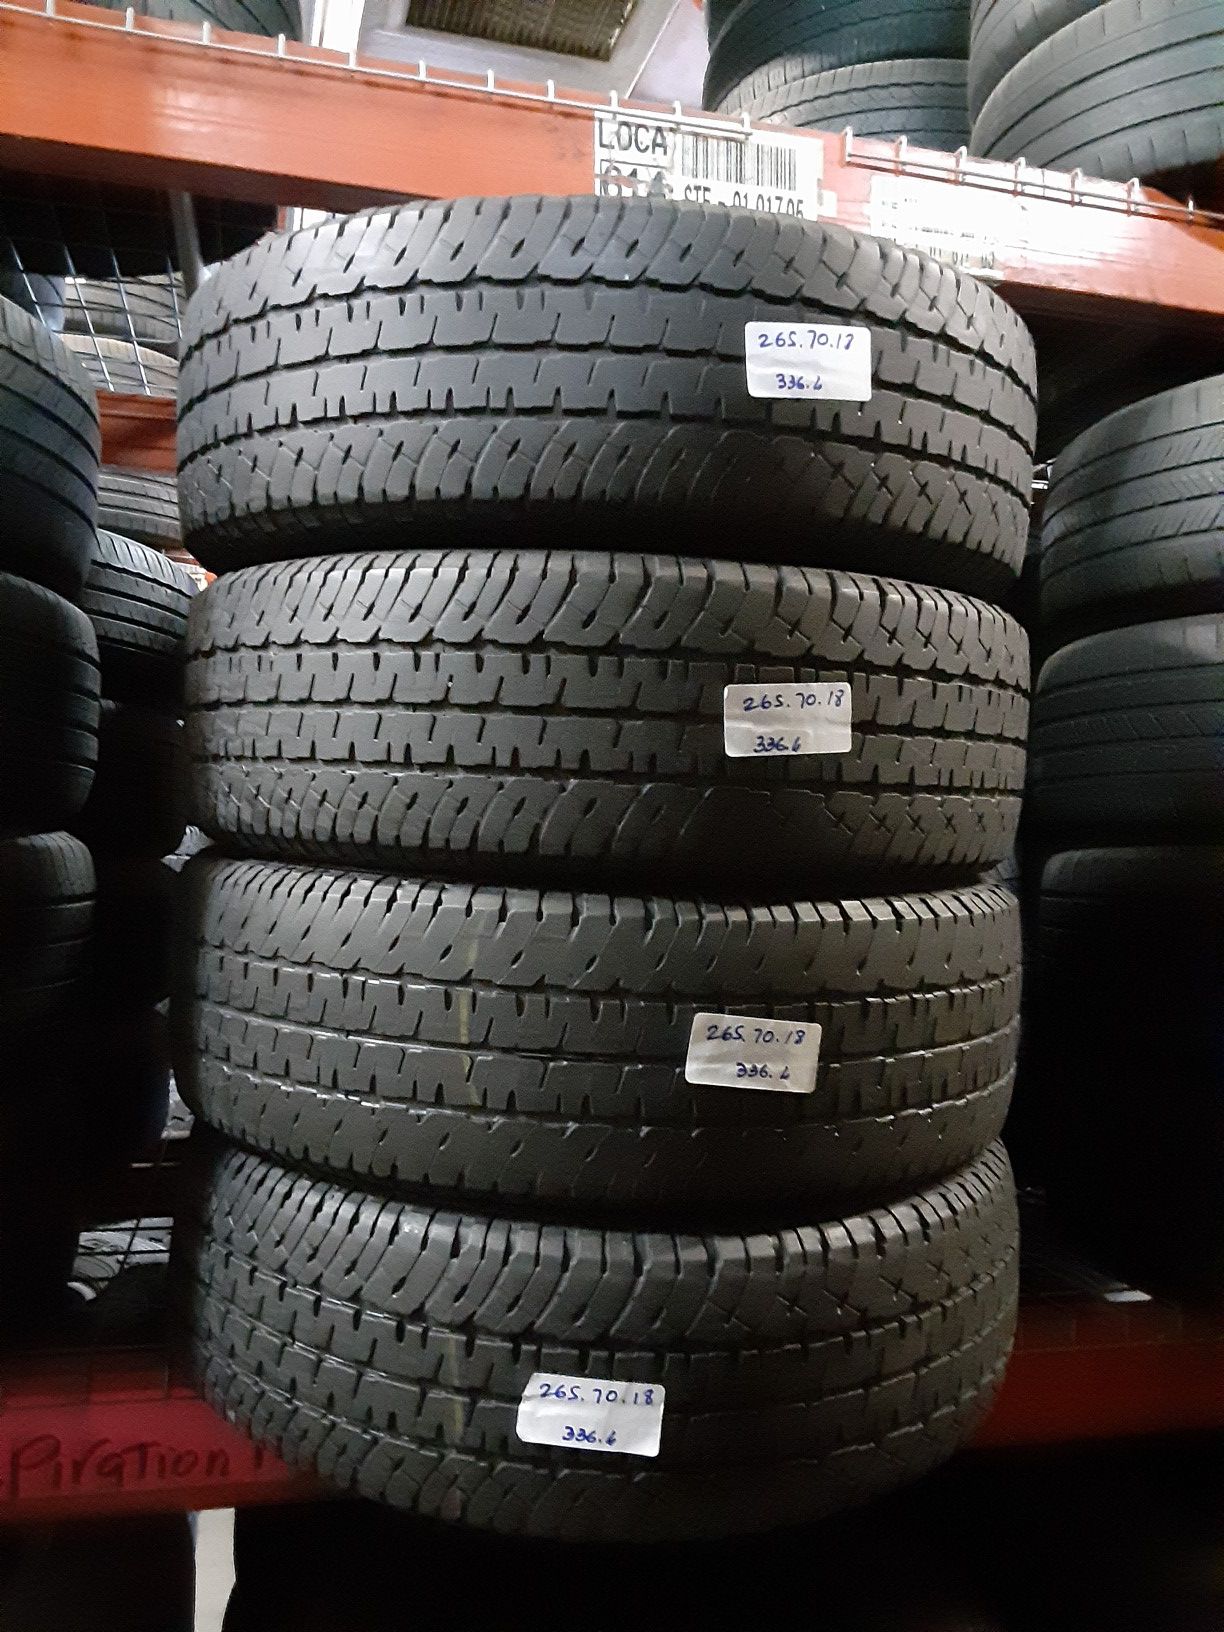 LT265/70R18 MICHELIN LTX AT2 LOAD E 80PSi TIRES 265/70R18 MATCHING FULL SET USED TIRES 265 70 18